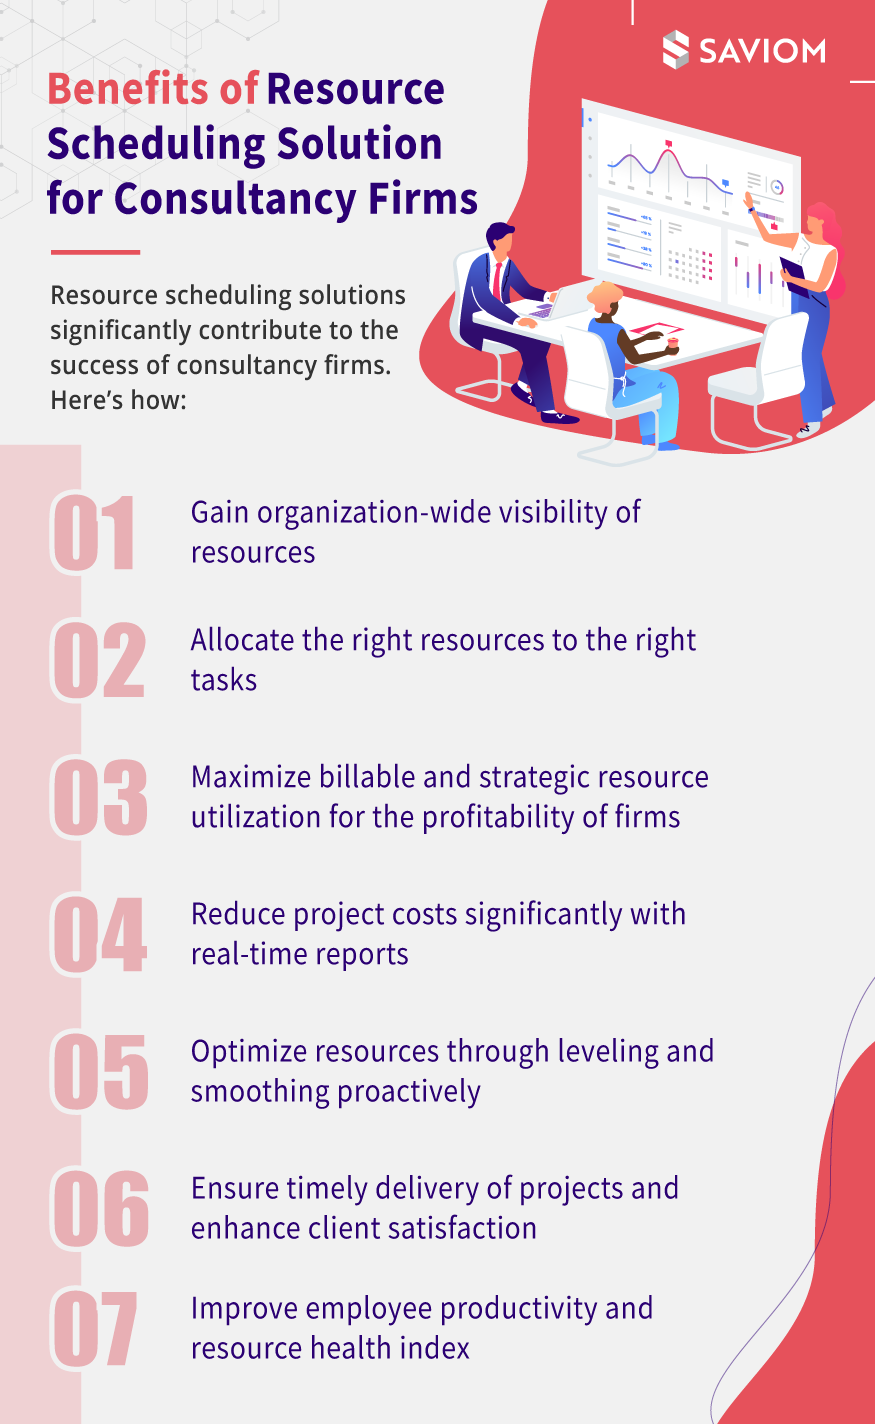 Why Resource Scheduling Solution Is Crucial For Consultancy Firms